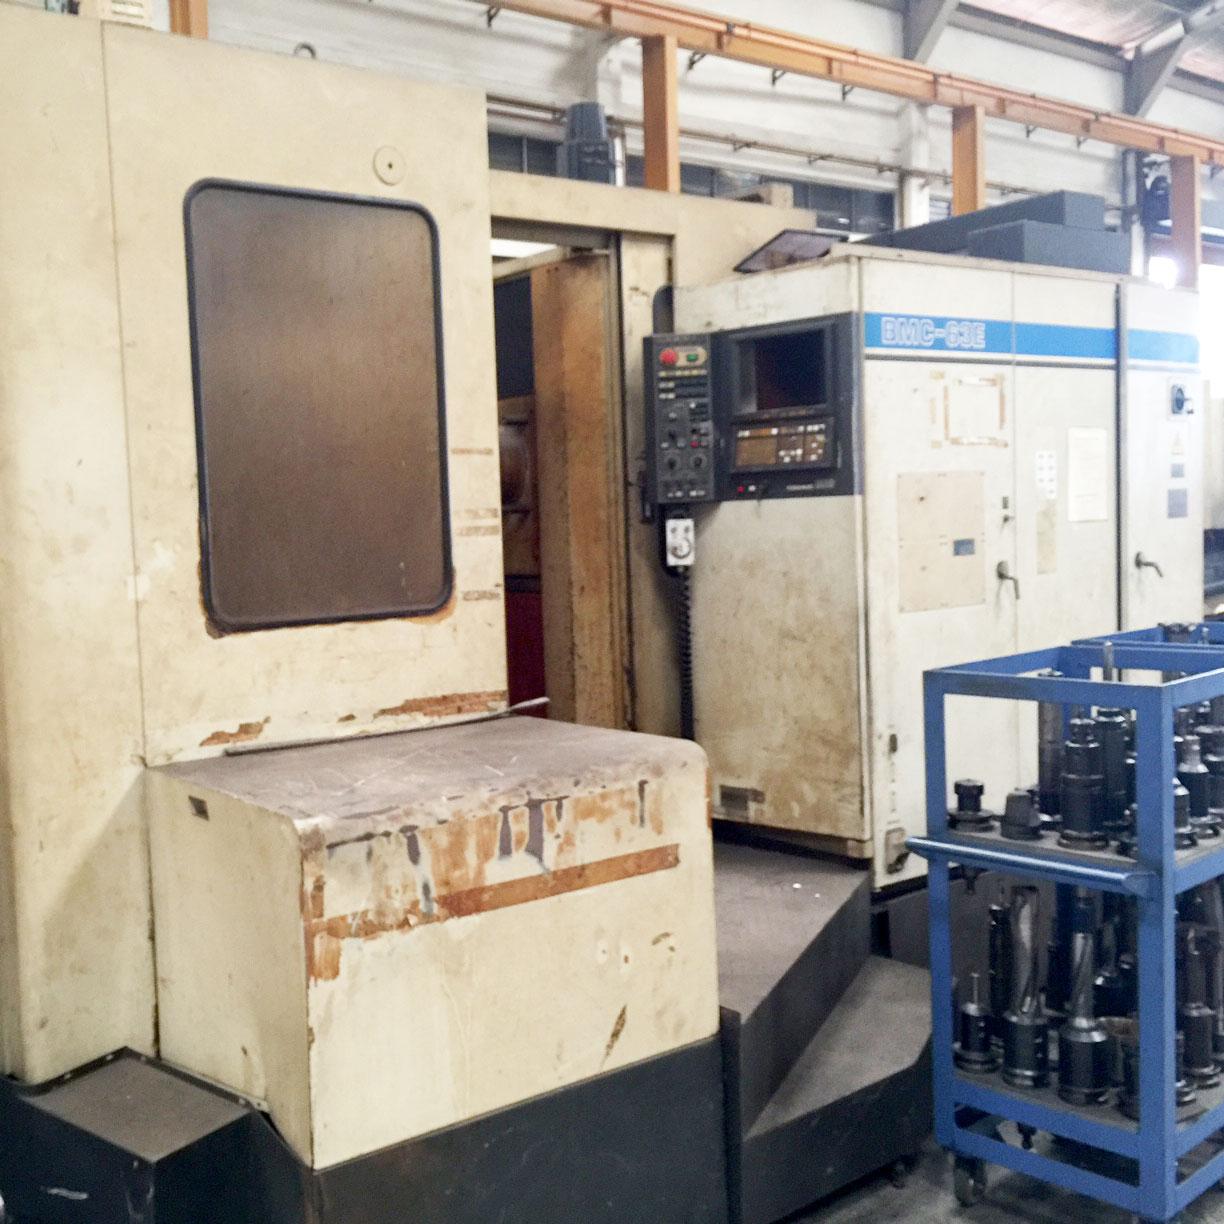 USED MACHINE FOR SALES. Year 1991. TOSHIBA BMC-63E TOSNUC 800 Horizontal Boring & Milling Machining Centers